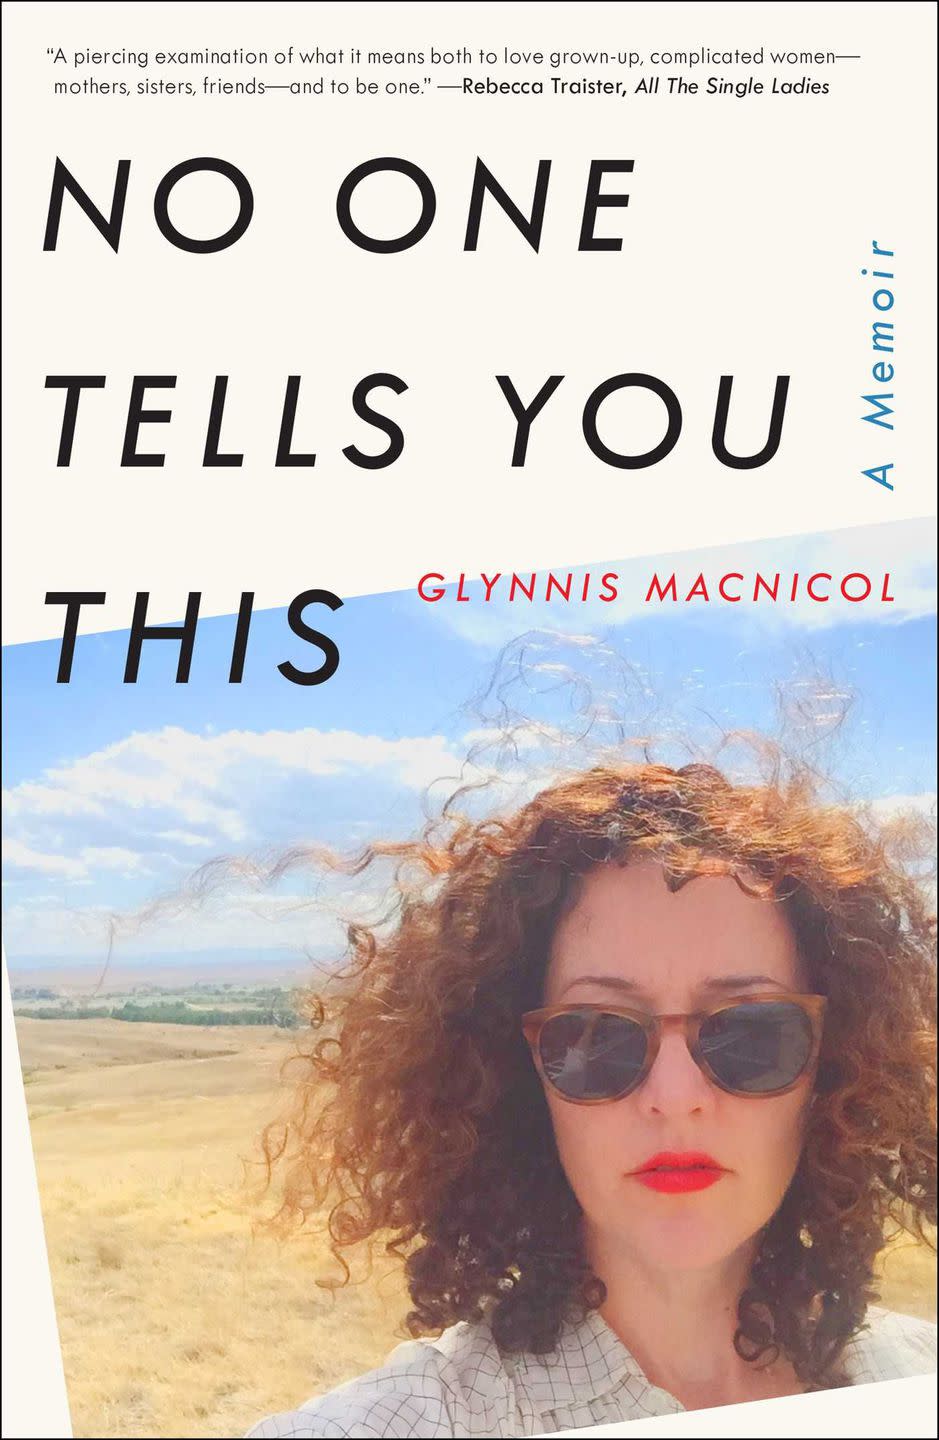 No One Tells You This by Glynnis MacNicol